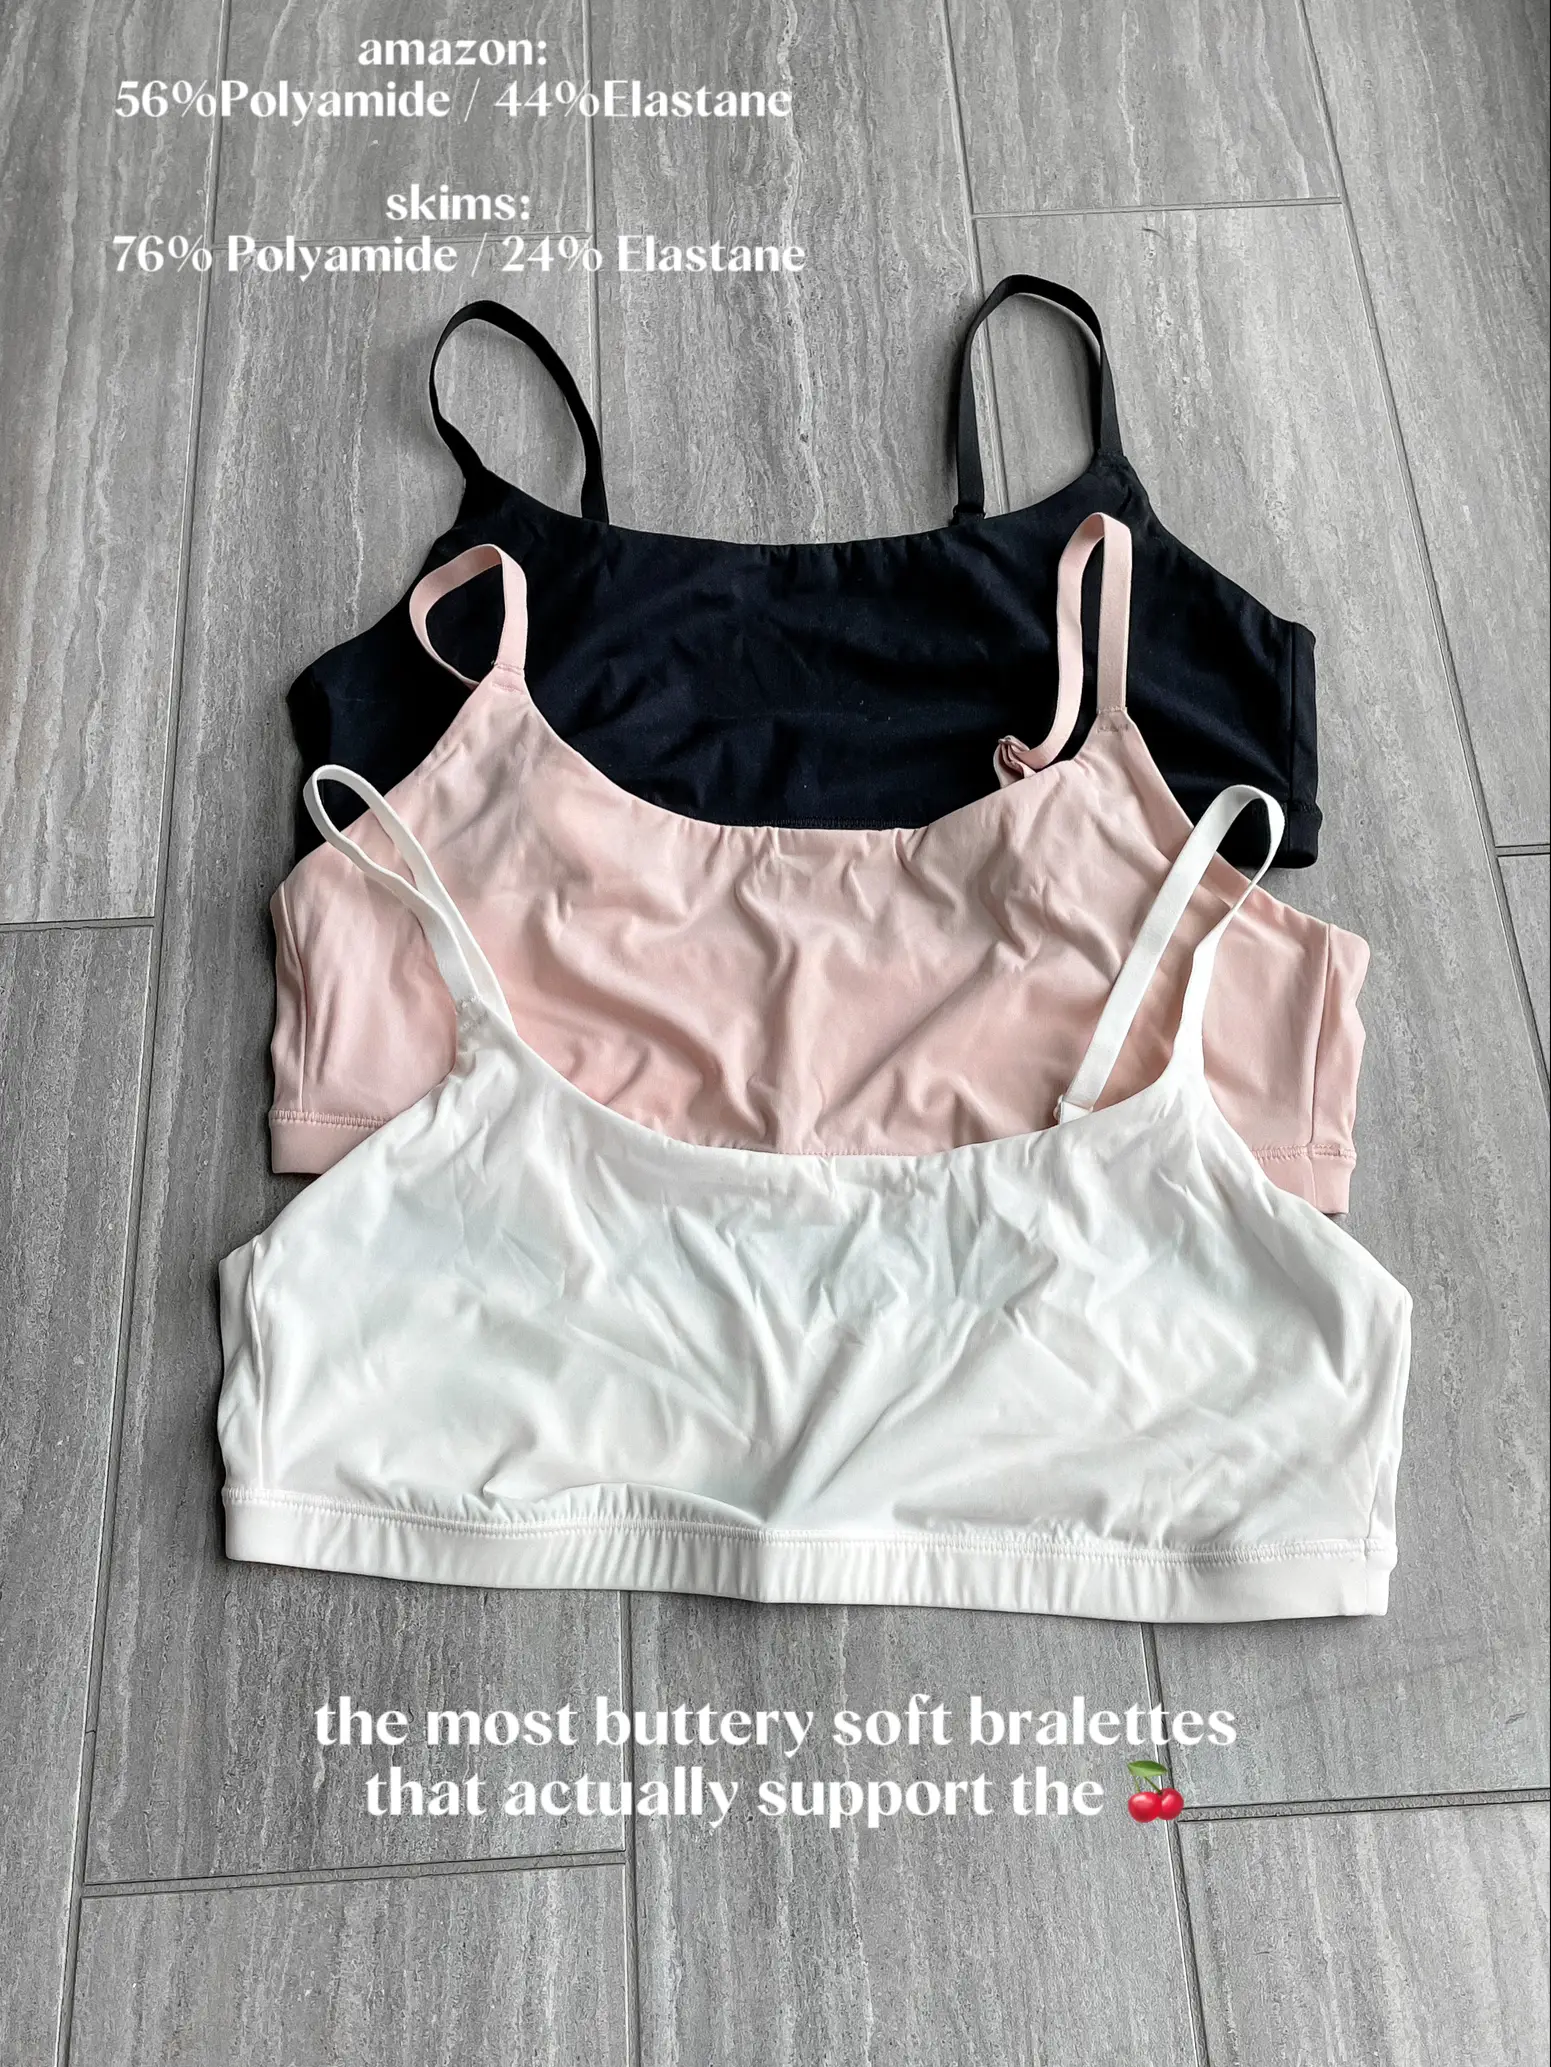 For the small chested girlies The Ultimate Bra by @skims is